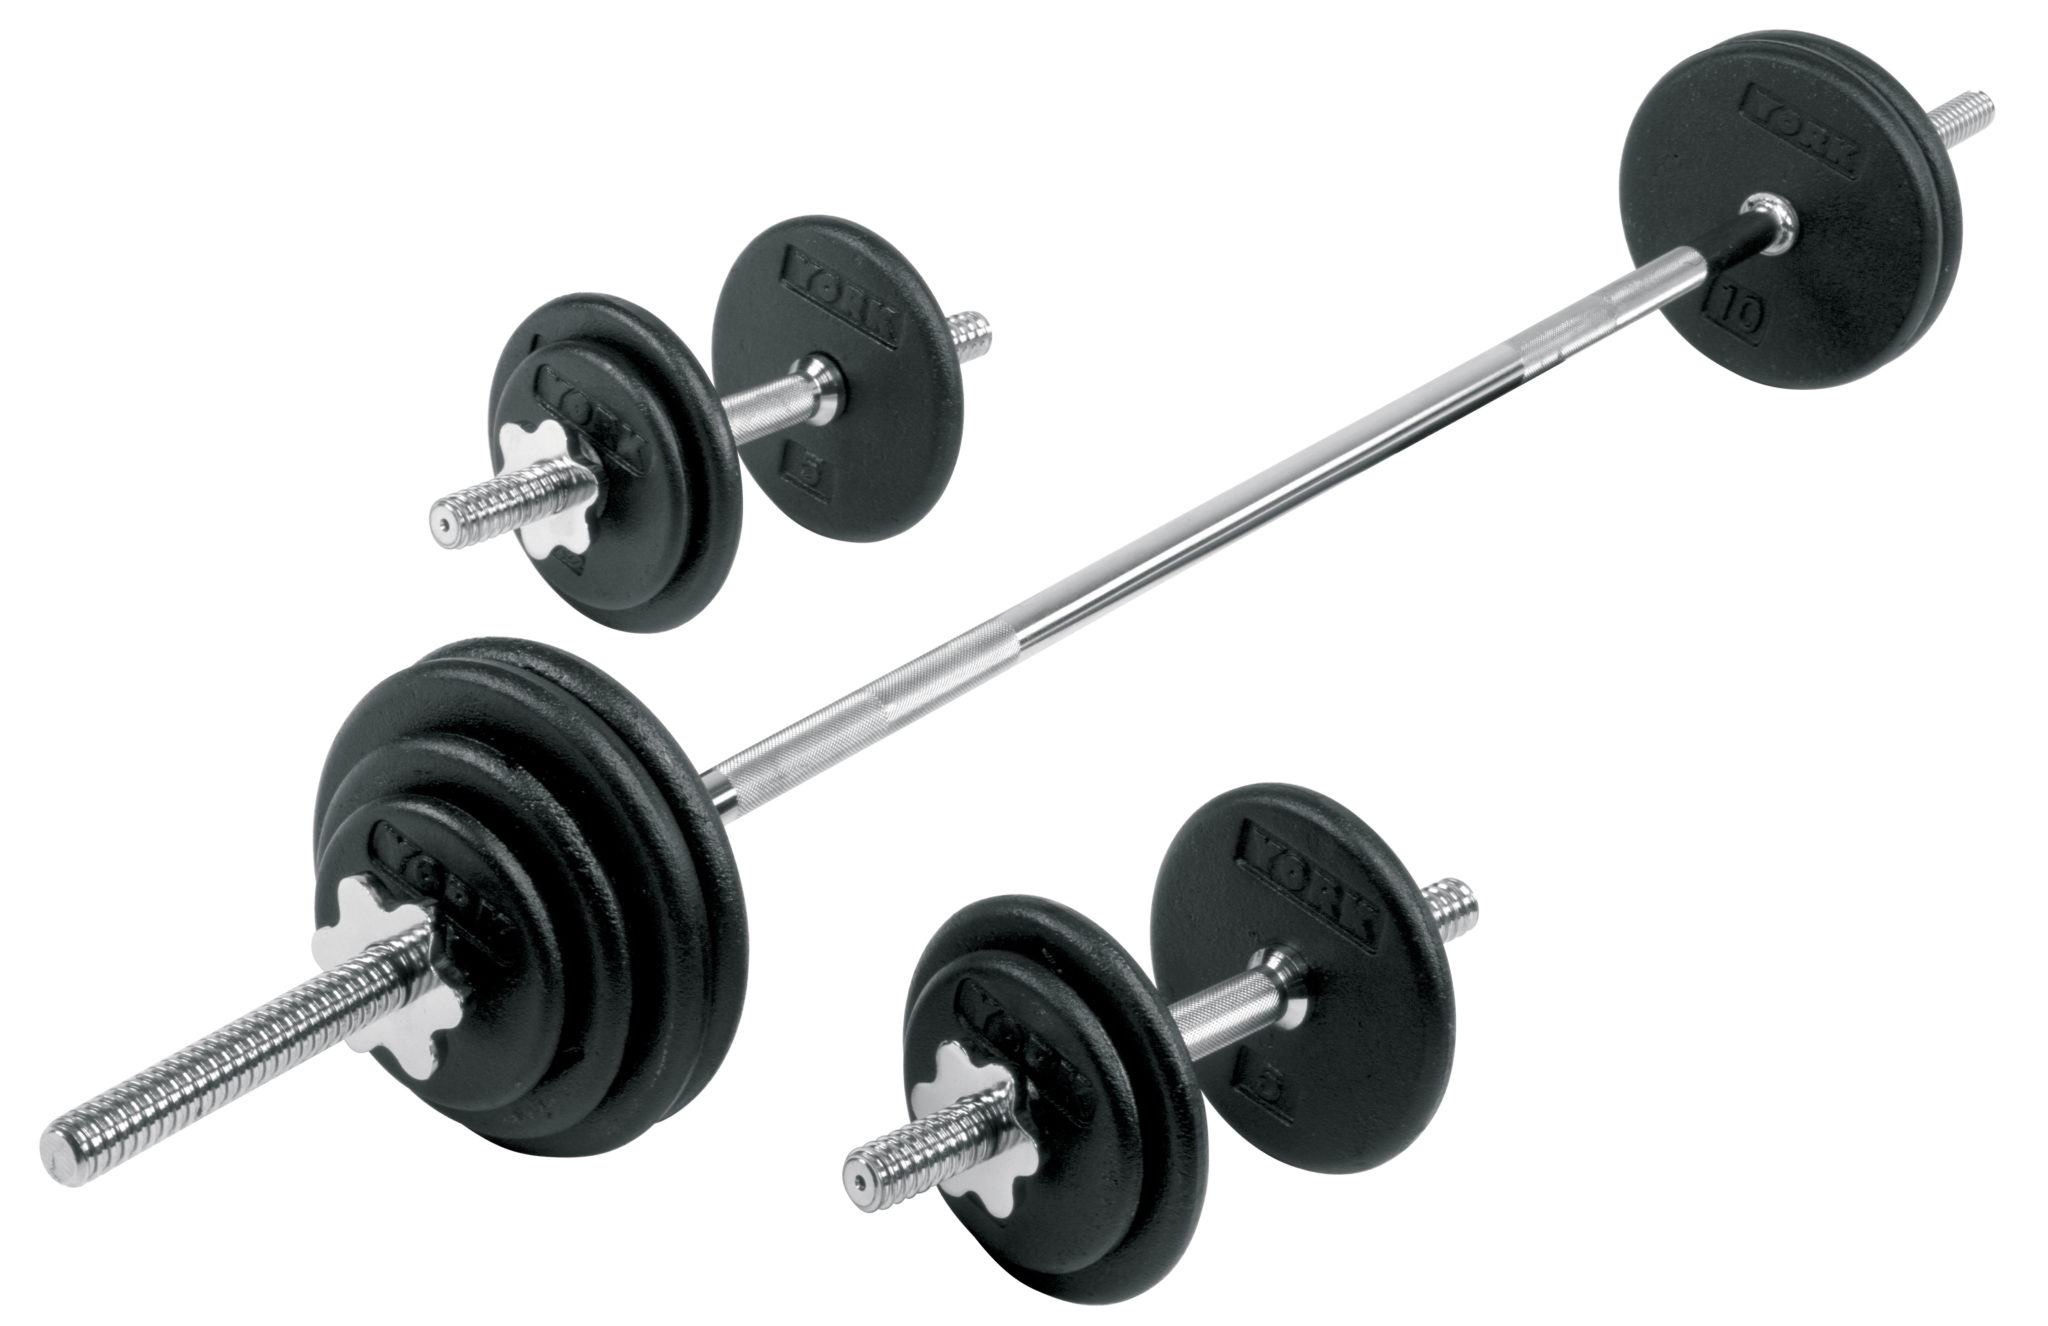 H&N Fashion Adjustable 44LB Dumbbell Weight Set Barbell Lifting 4 Spinlock Collars & 2 Connector Options for Gym Home Bodybuilding Training